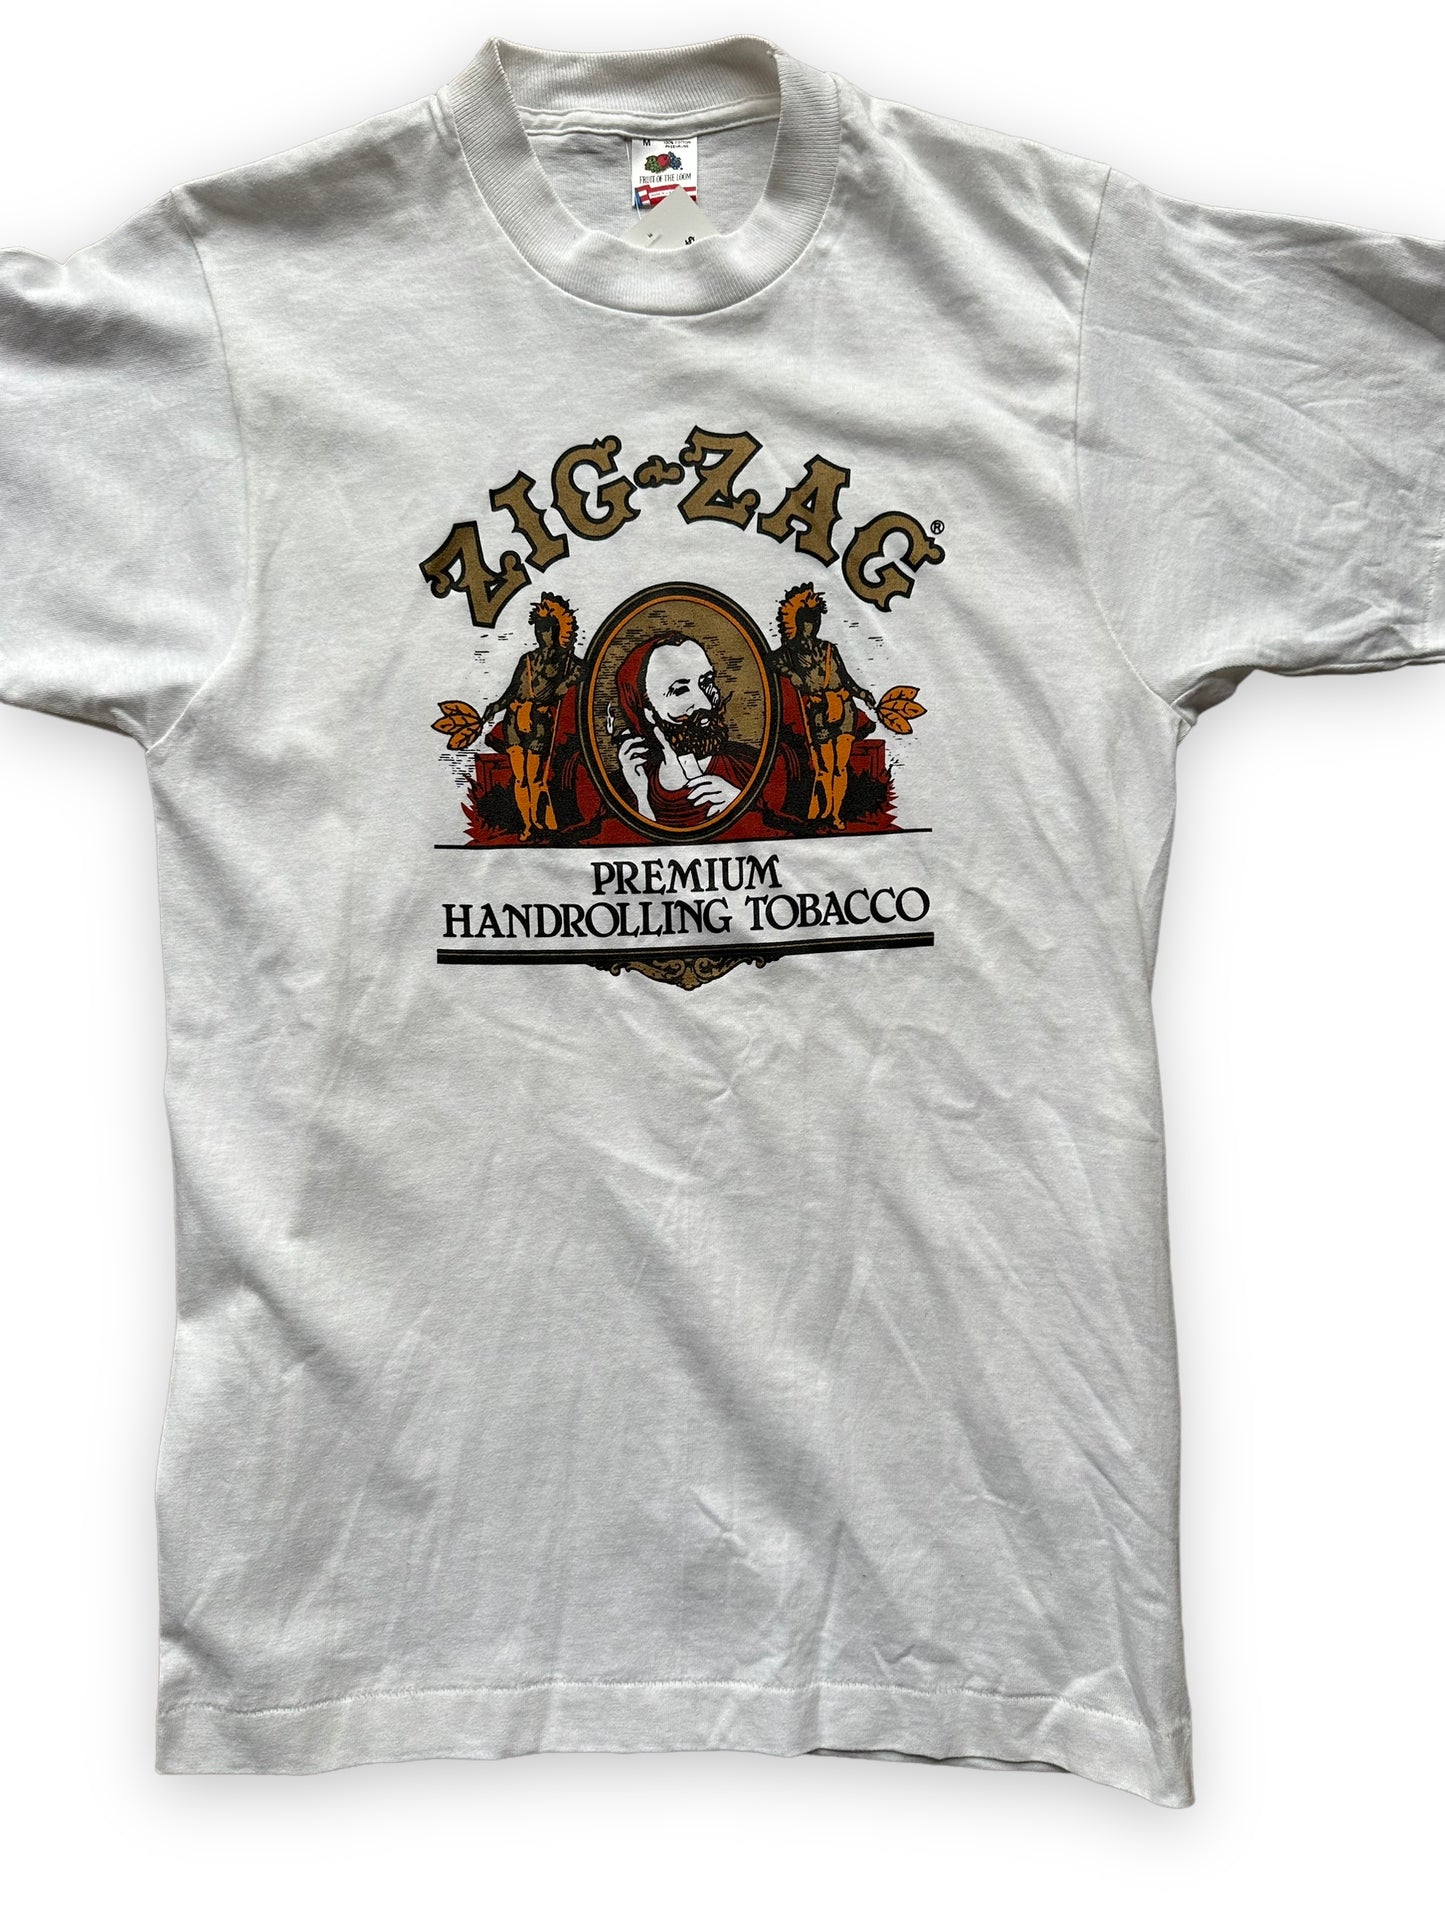 Front Graphic on Vintage White Zig-Zag Premium Hand-Rolling Tobacco Tee SZ M | Vintage Weed Tees Seattle | Barn Owl Vintage